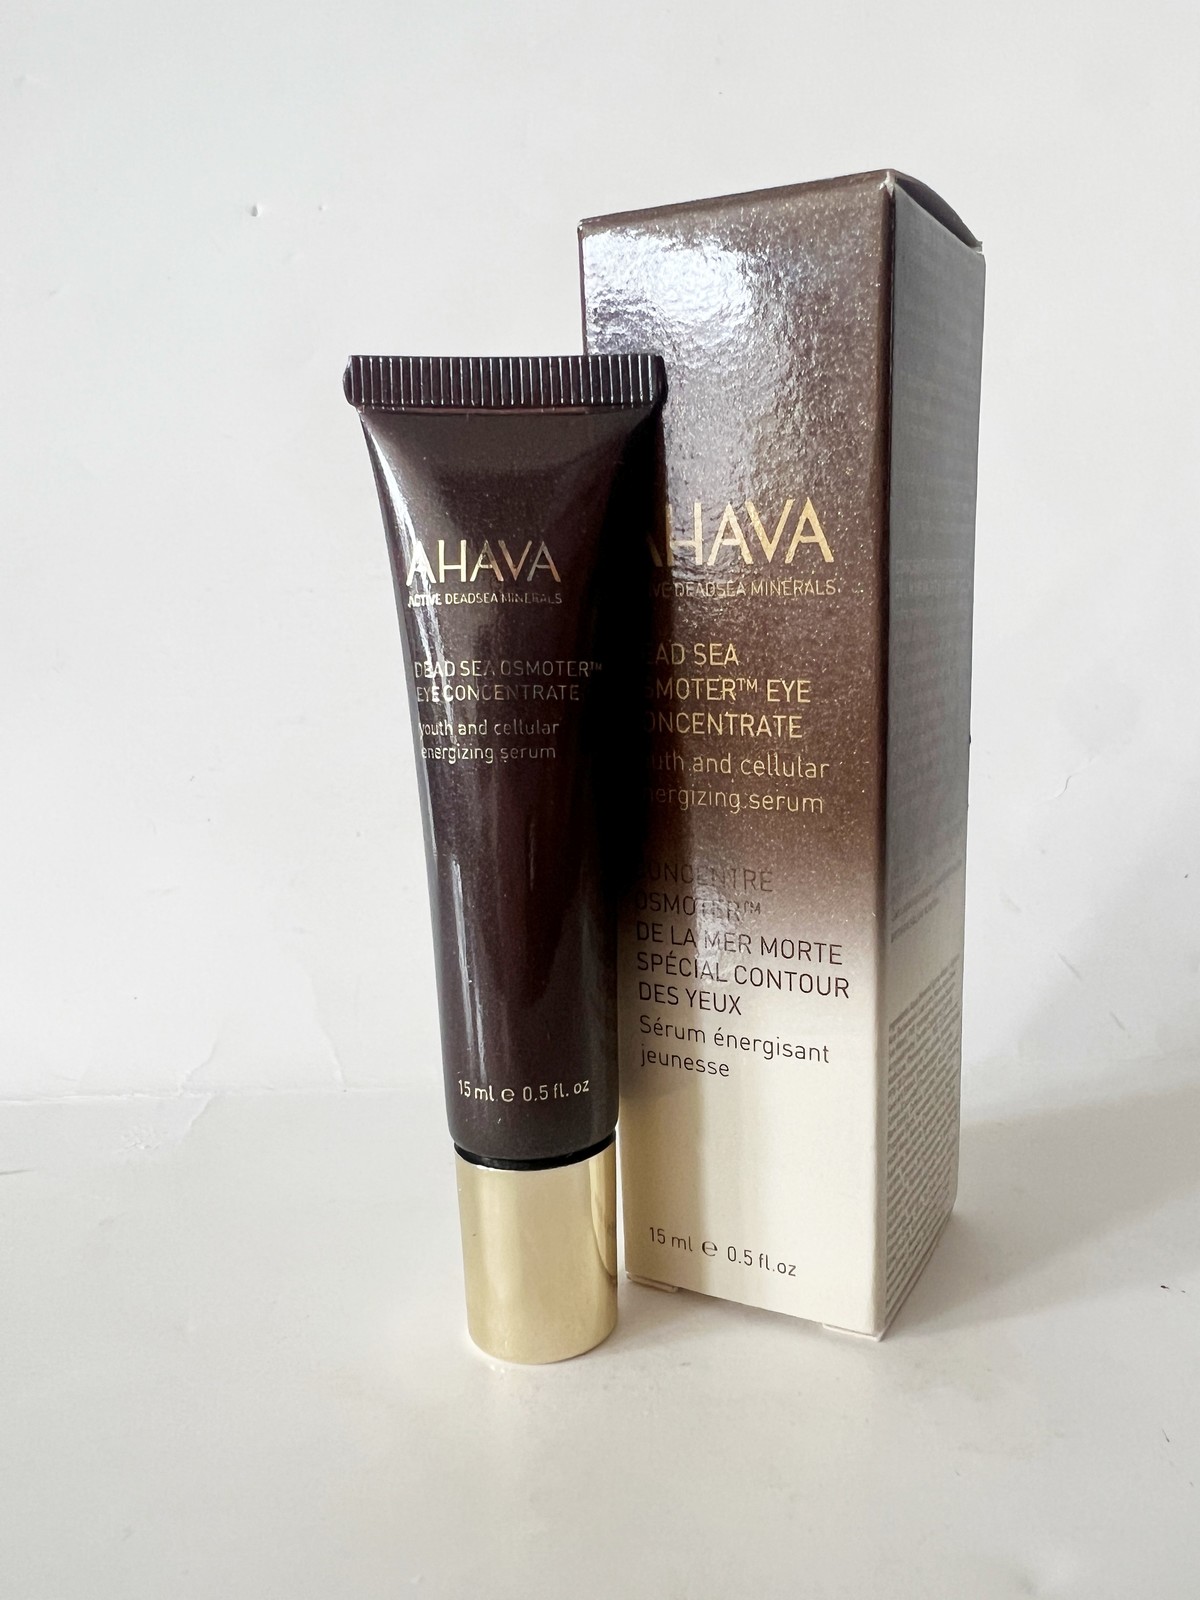 Ahava Dead Sea Psmoter Eye Concentrate 15ml/0.5oz Boxed  - $45.01